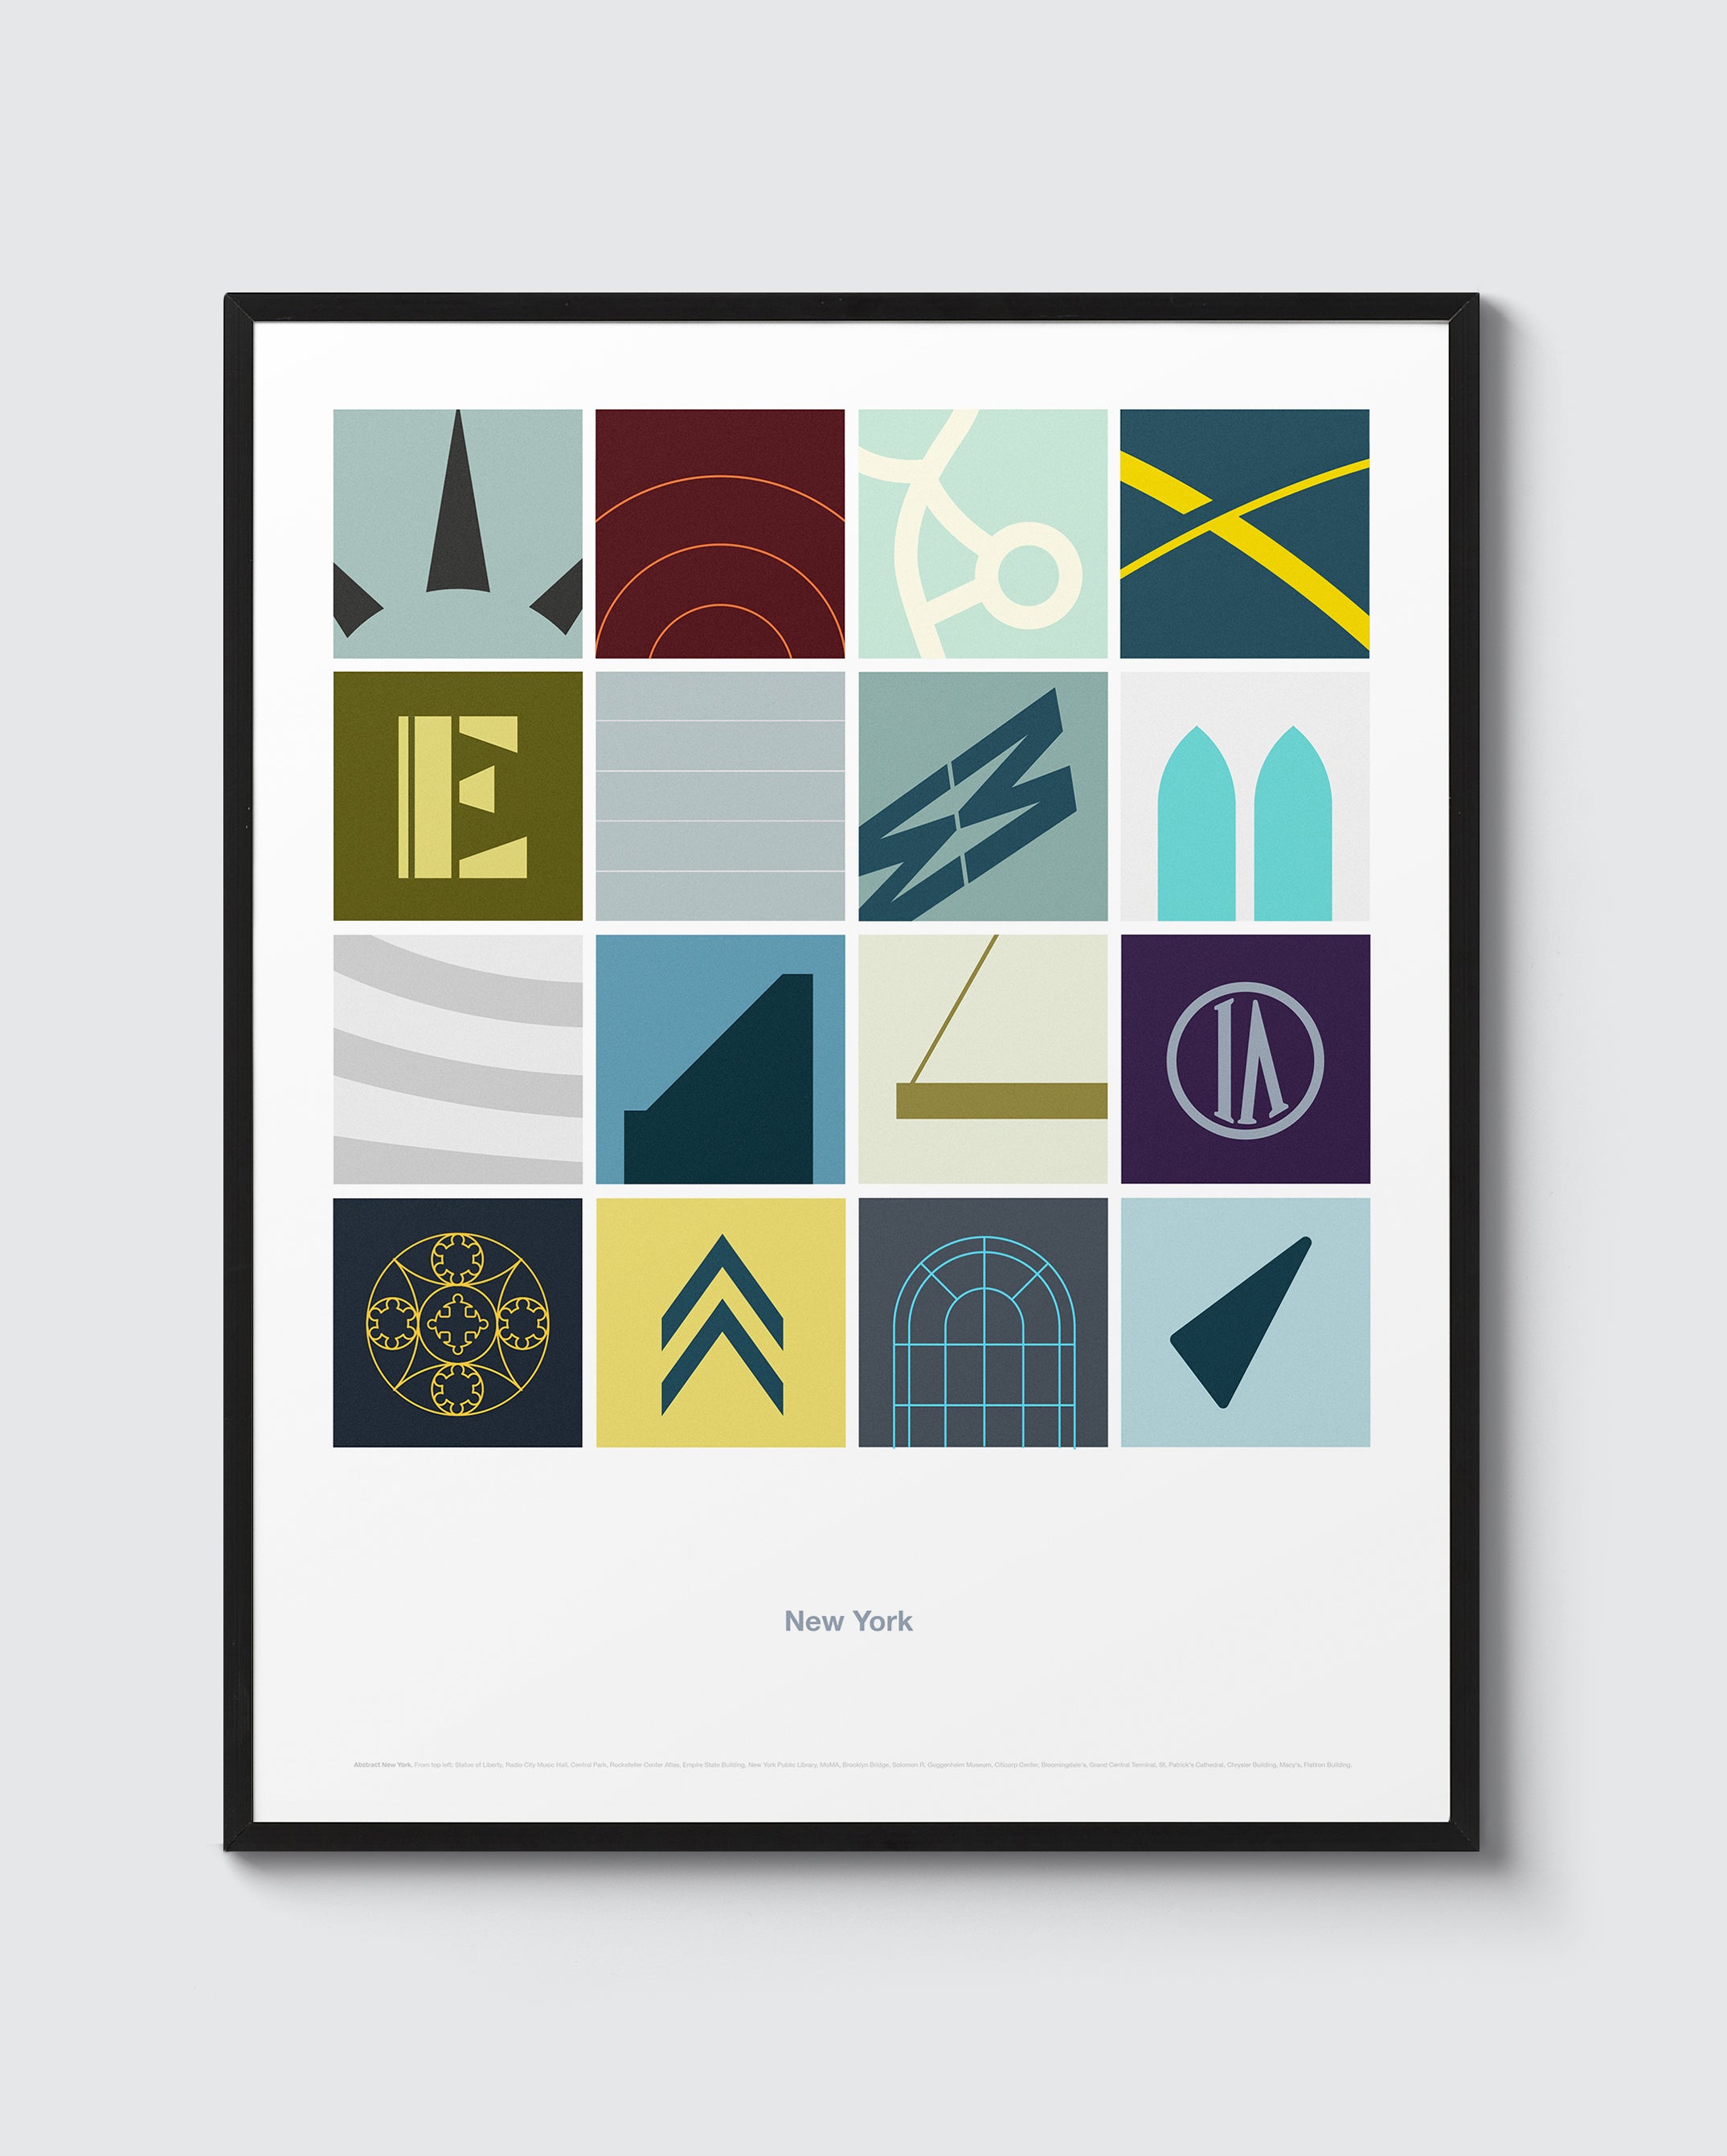 Abstract New York Print. 16 illustrations of architecture from New York City. Simple bold design.